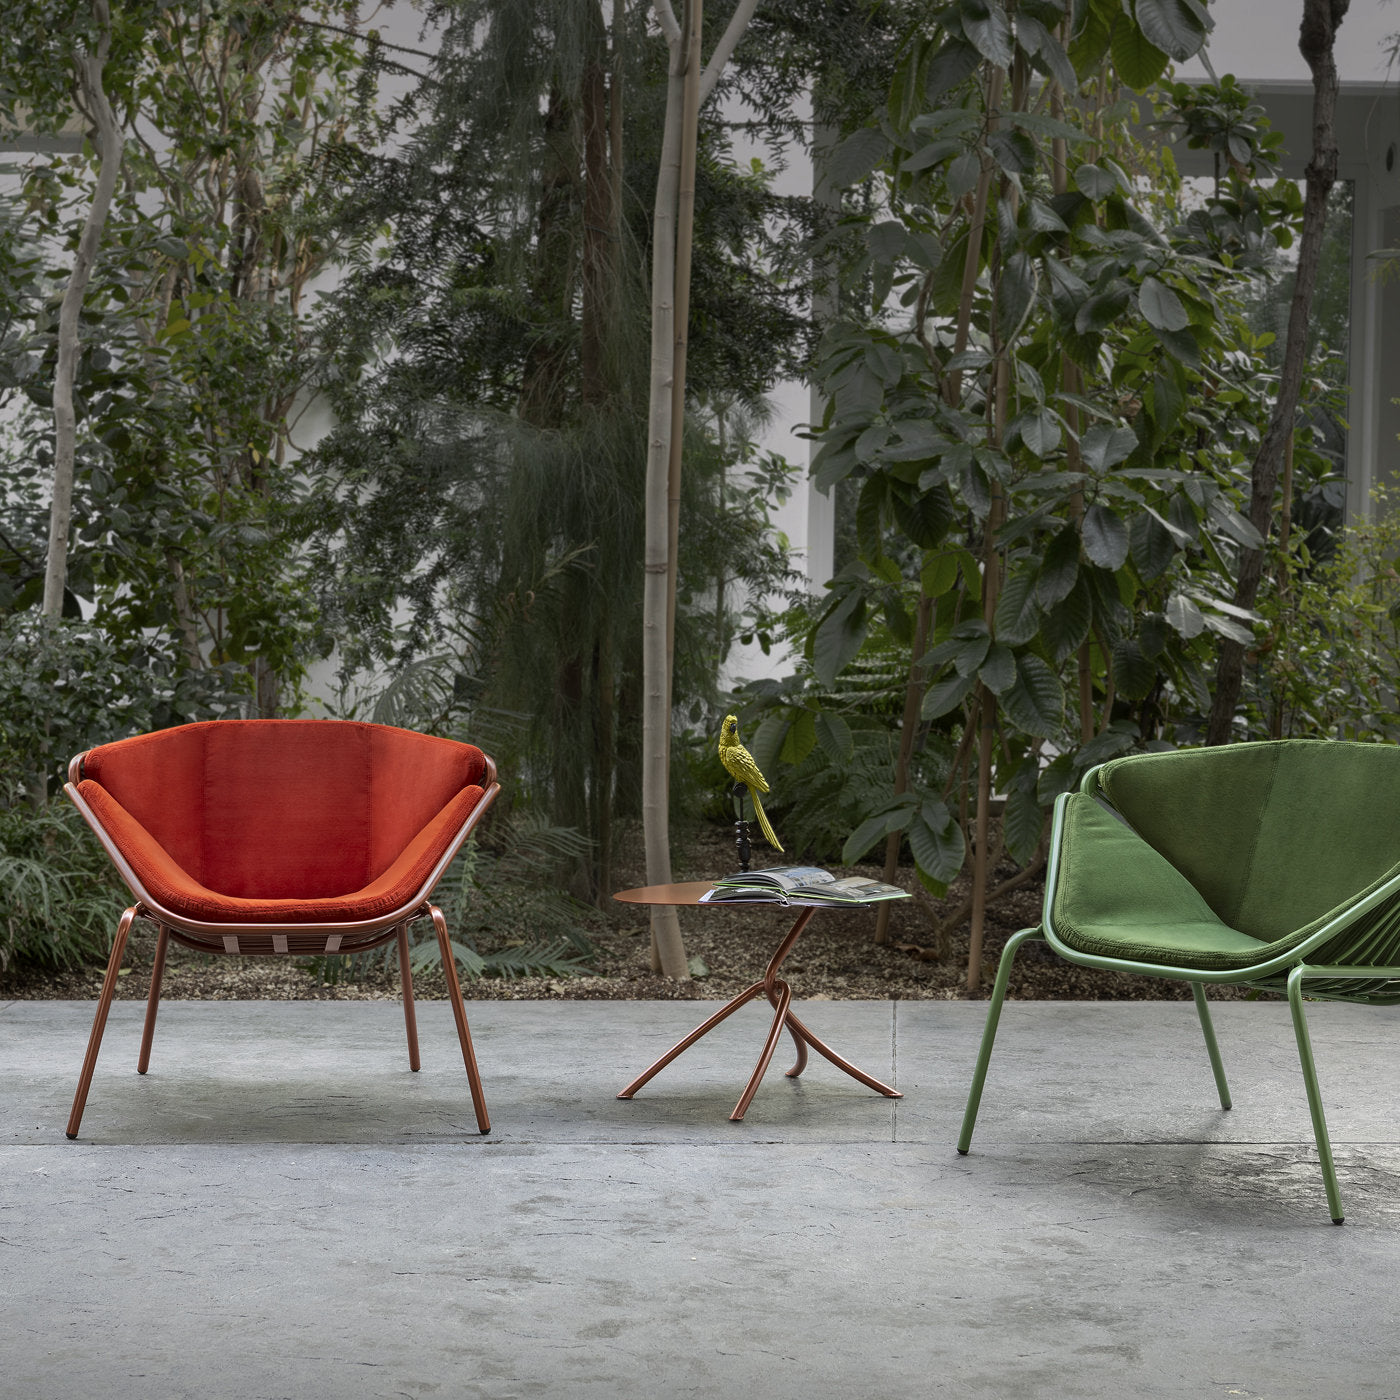 Skin Lounge Red Outdoor Chair By Giacomo Cattani - Alternative view 5